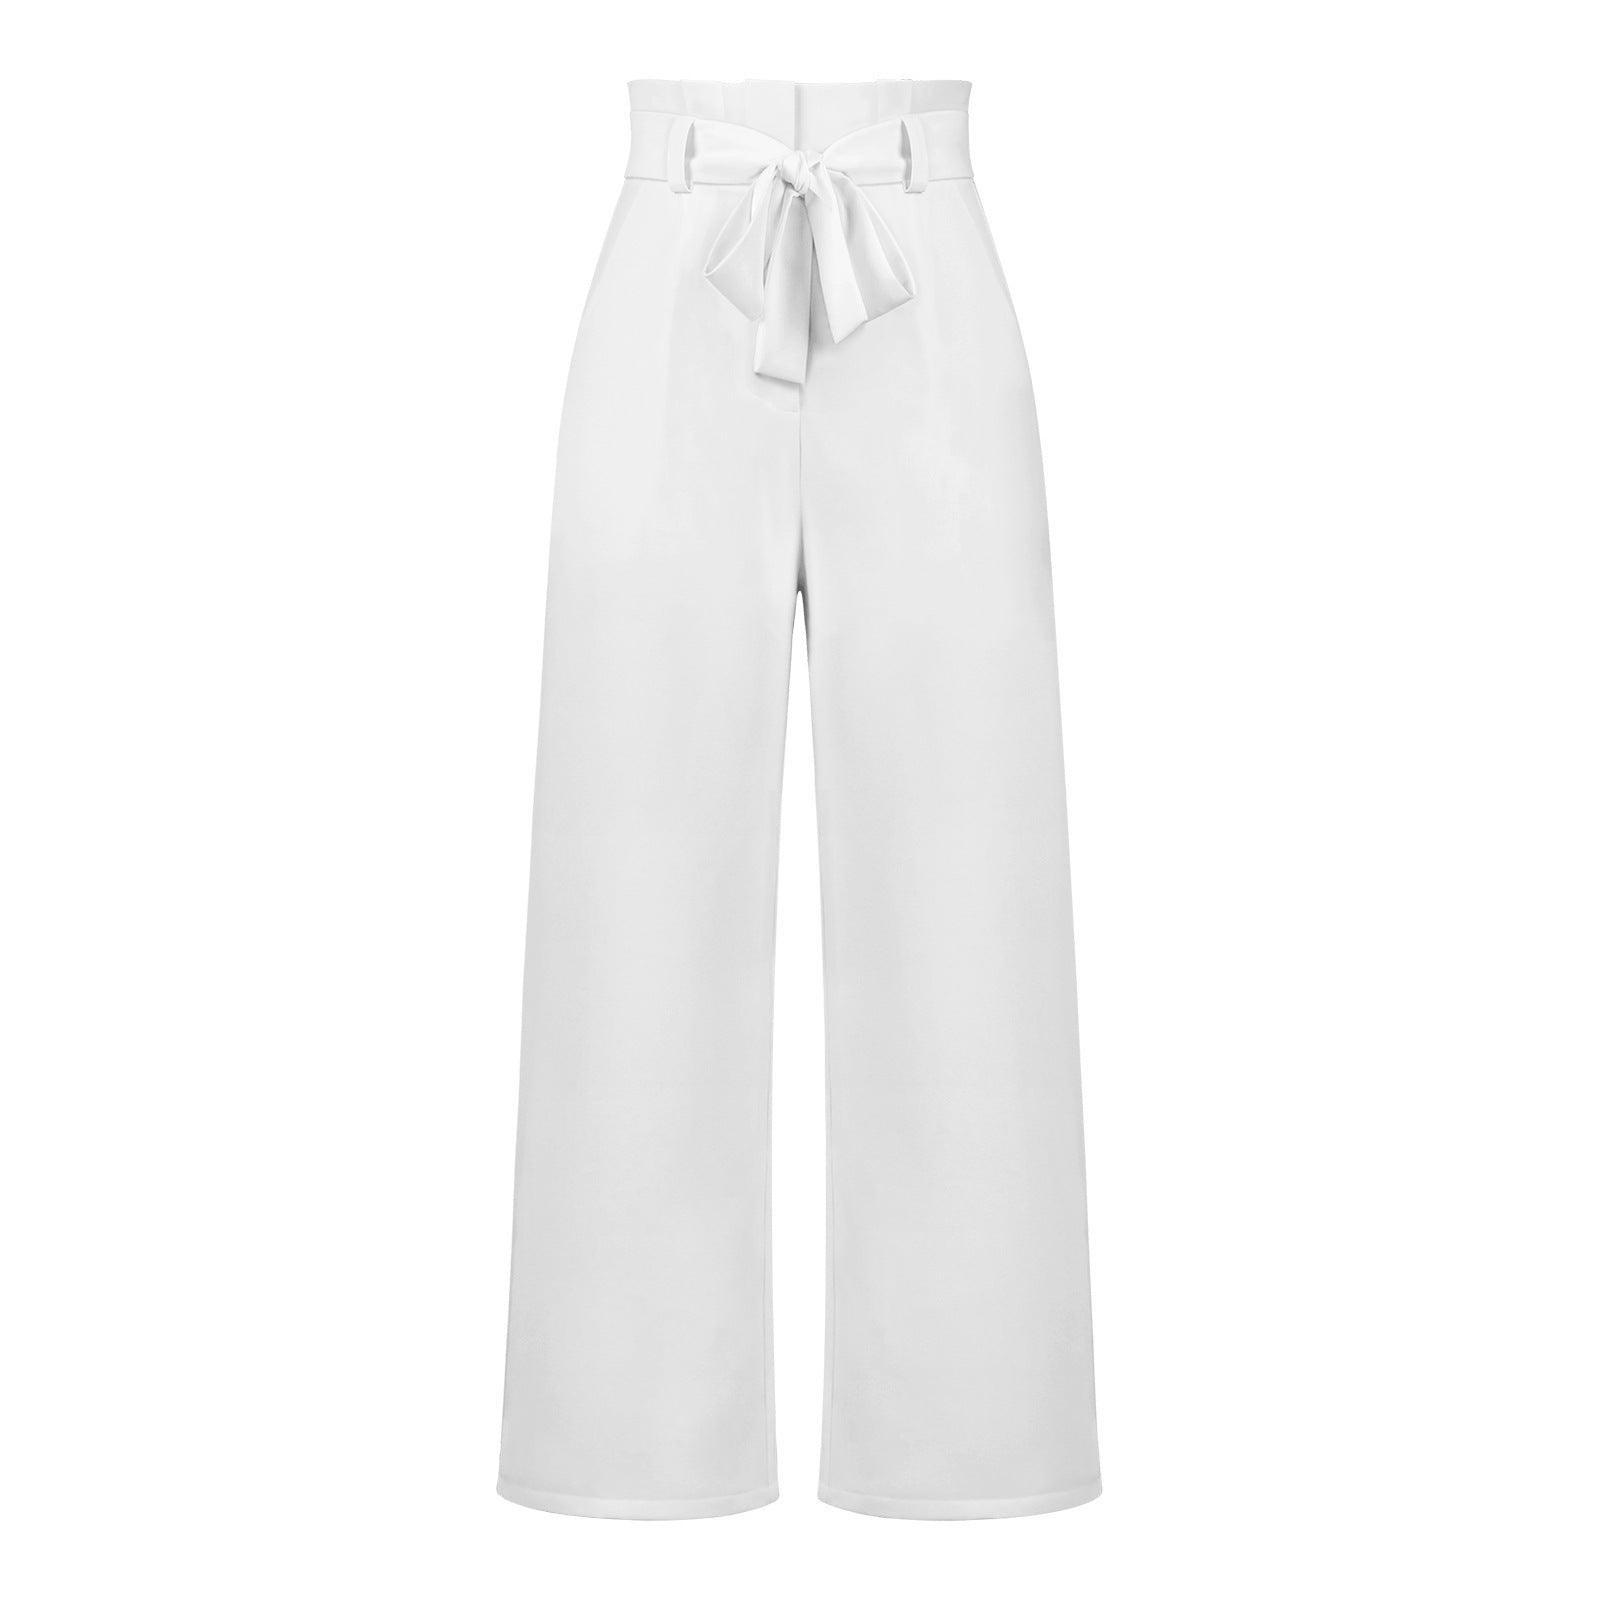 Women's Fashionable Wide-Leg Pants – Urban Chic Collection - Glinyt